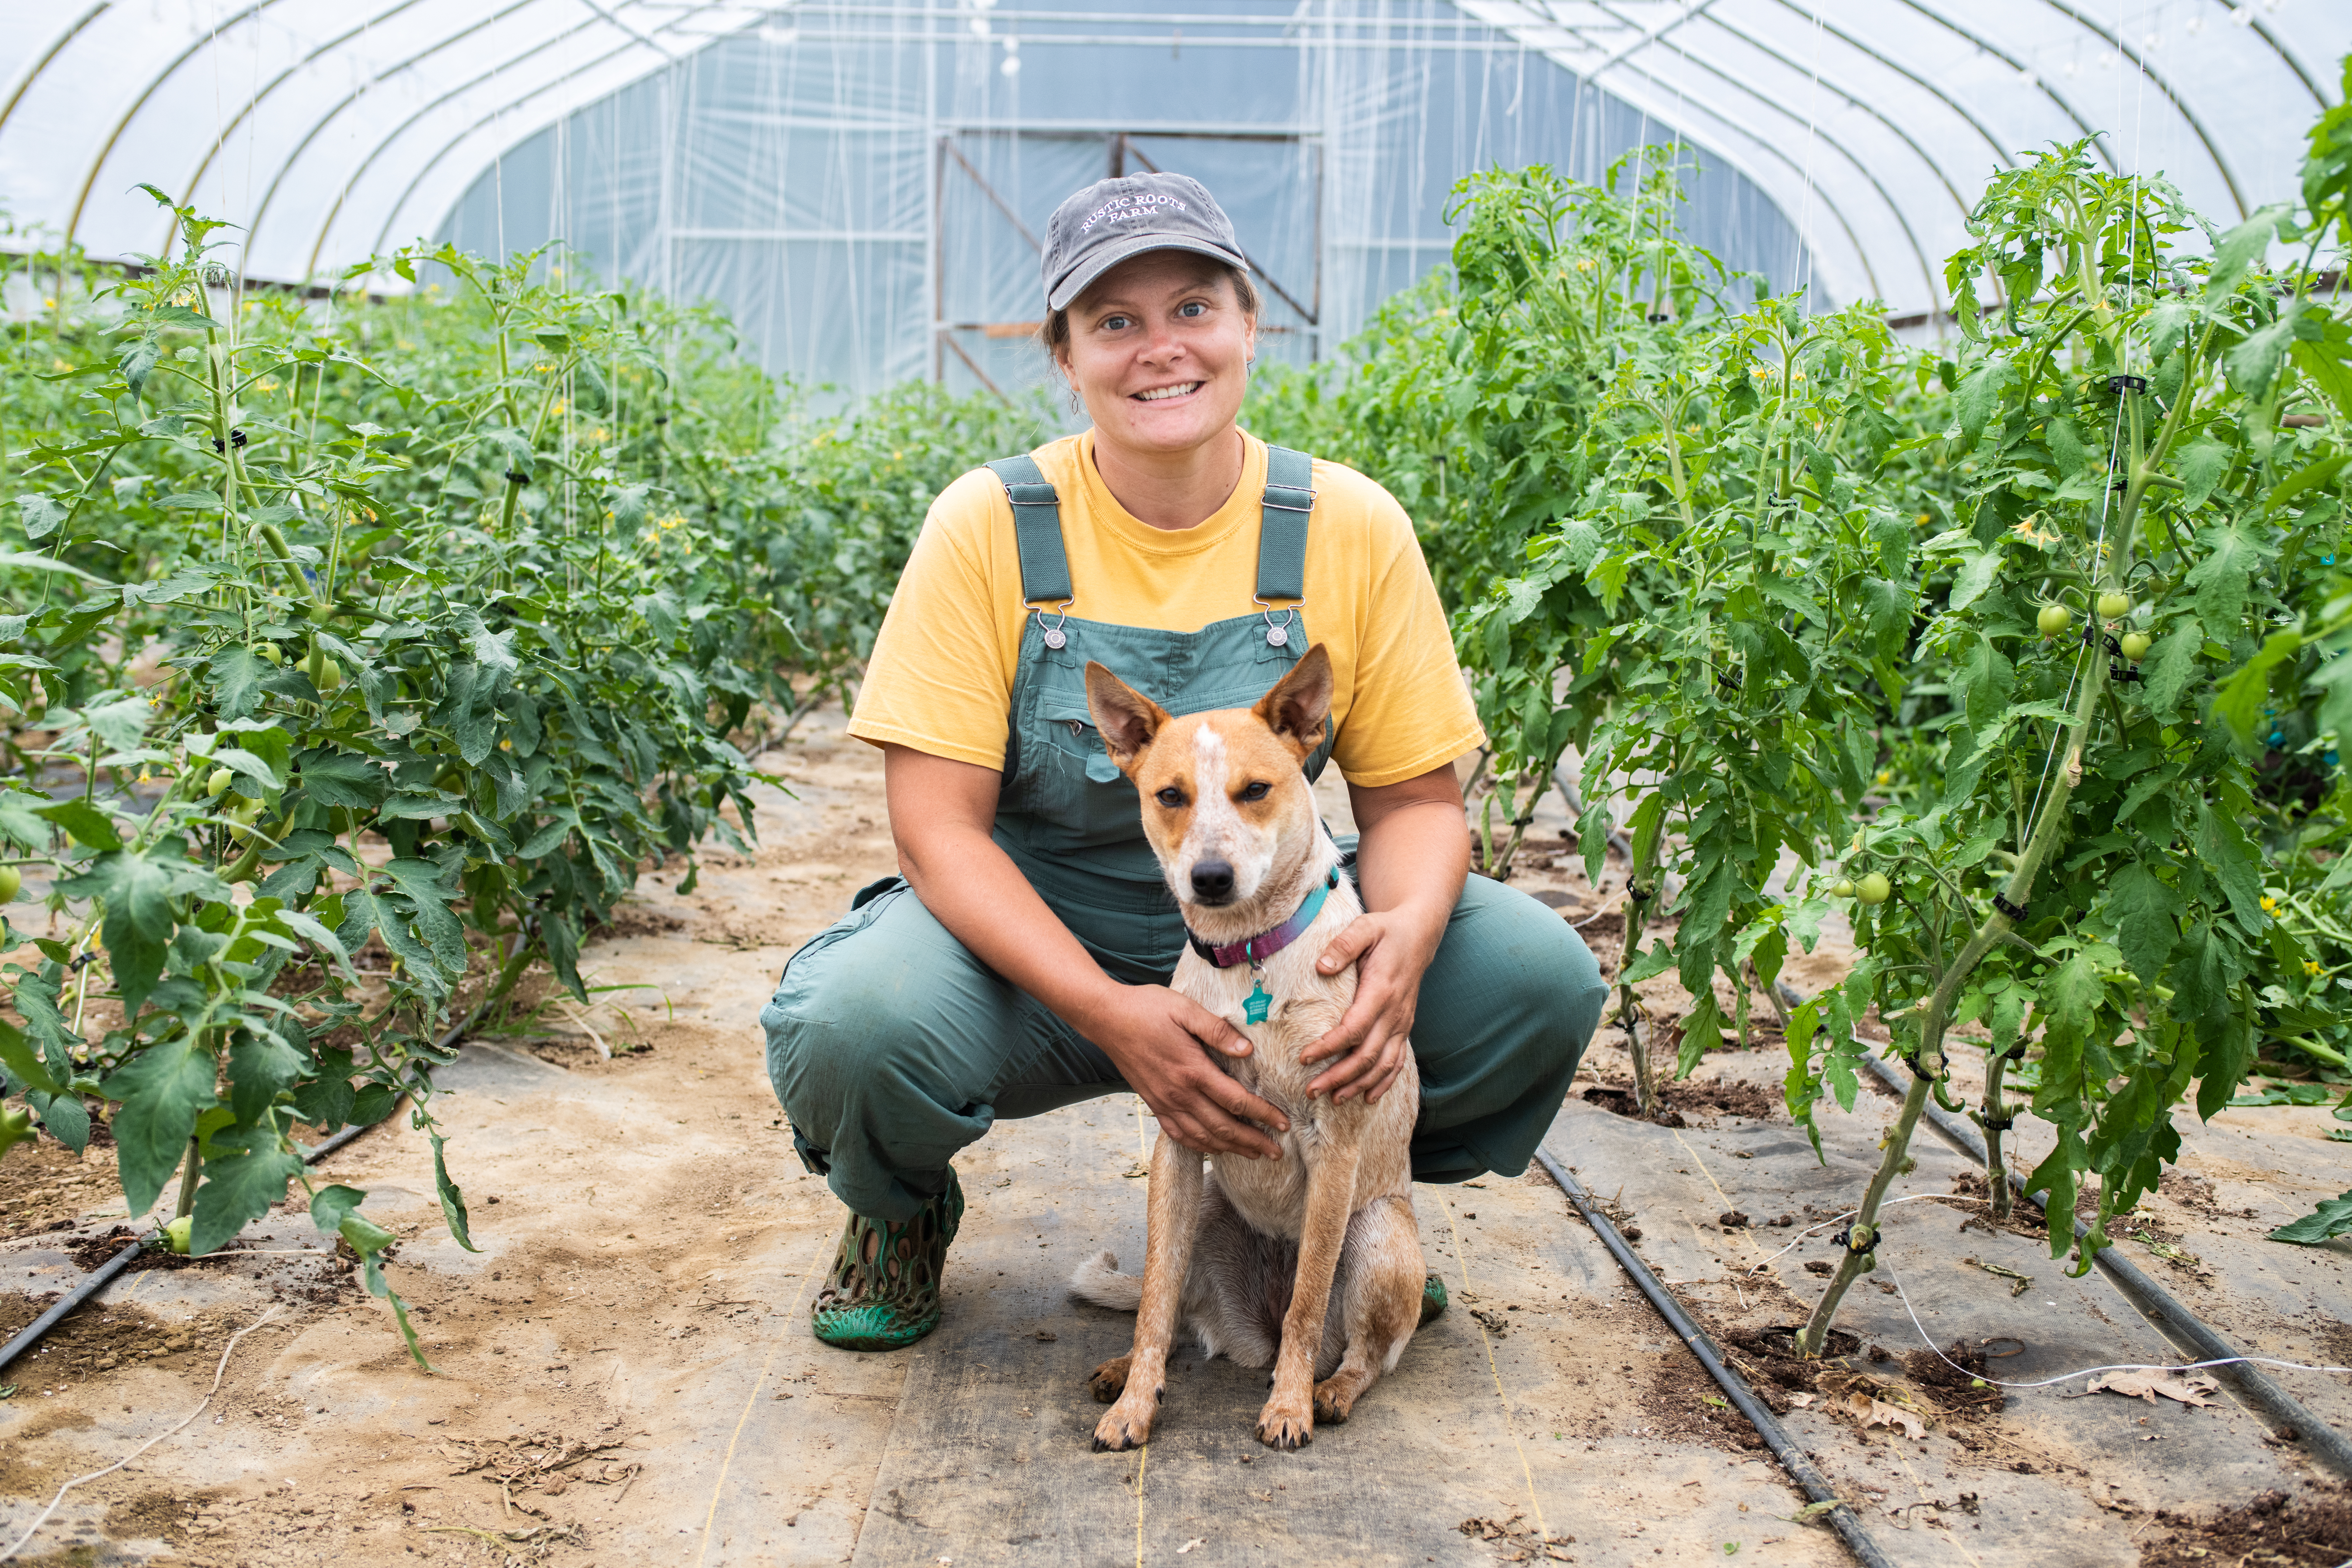 A female farmer and her dog sit between rows of crops in a hoop house